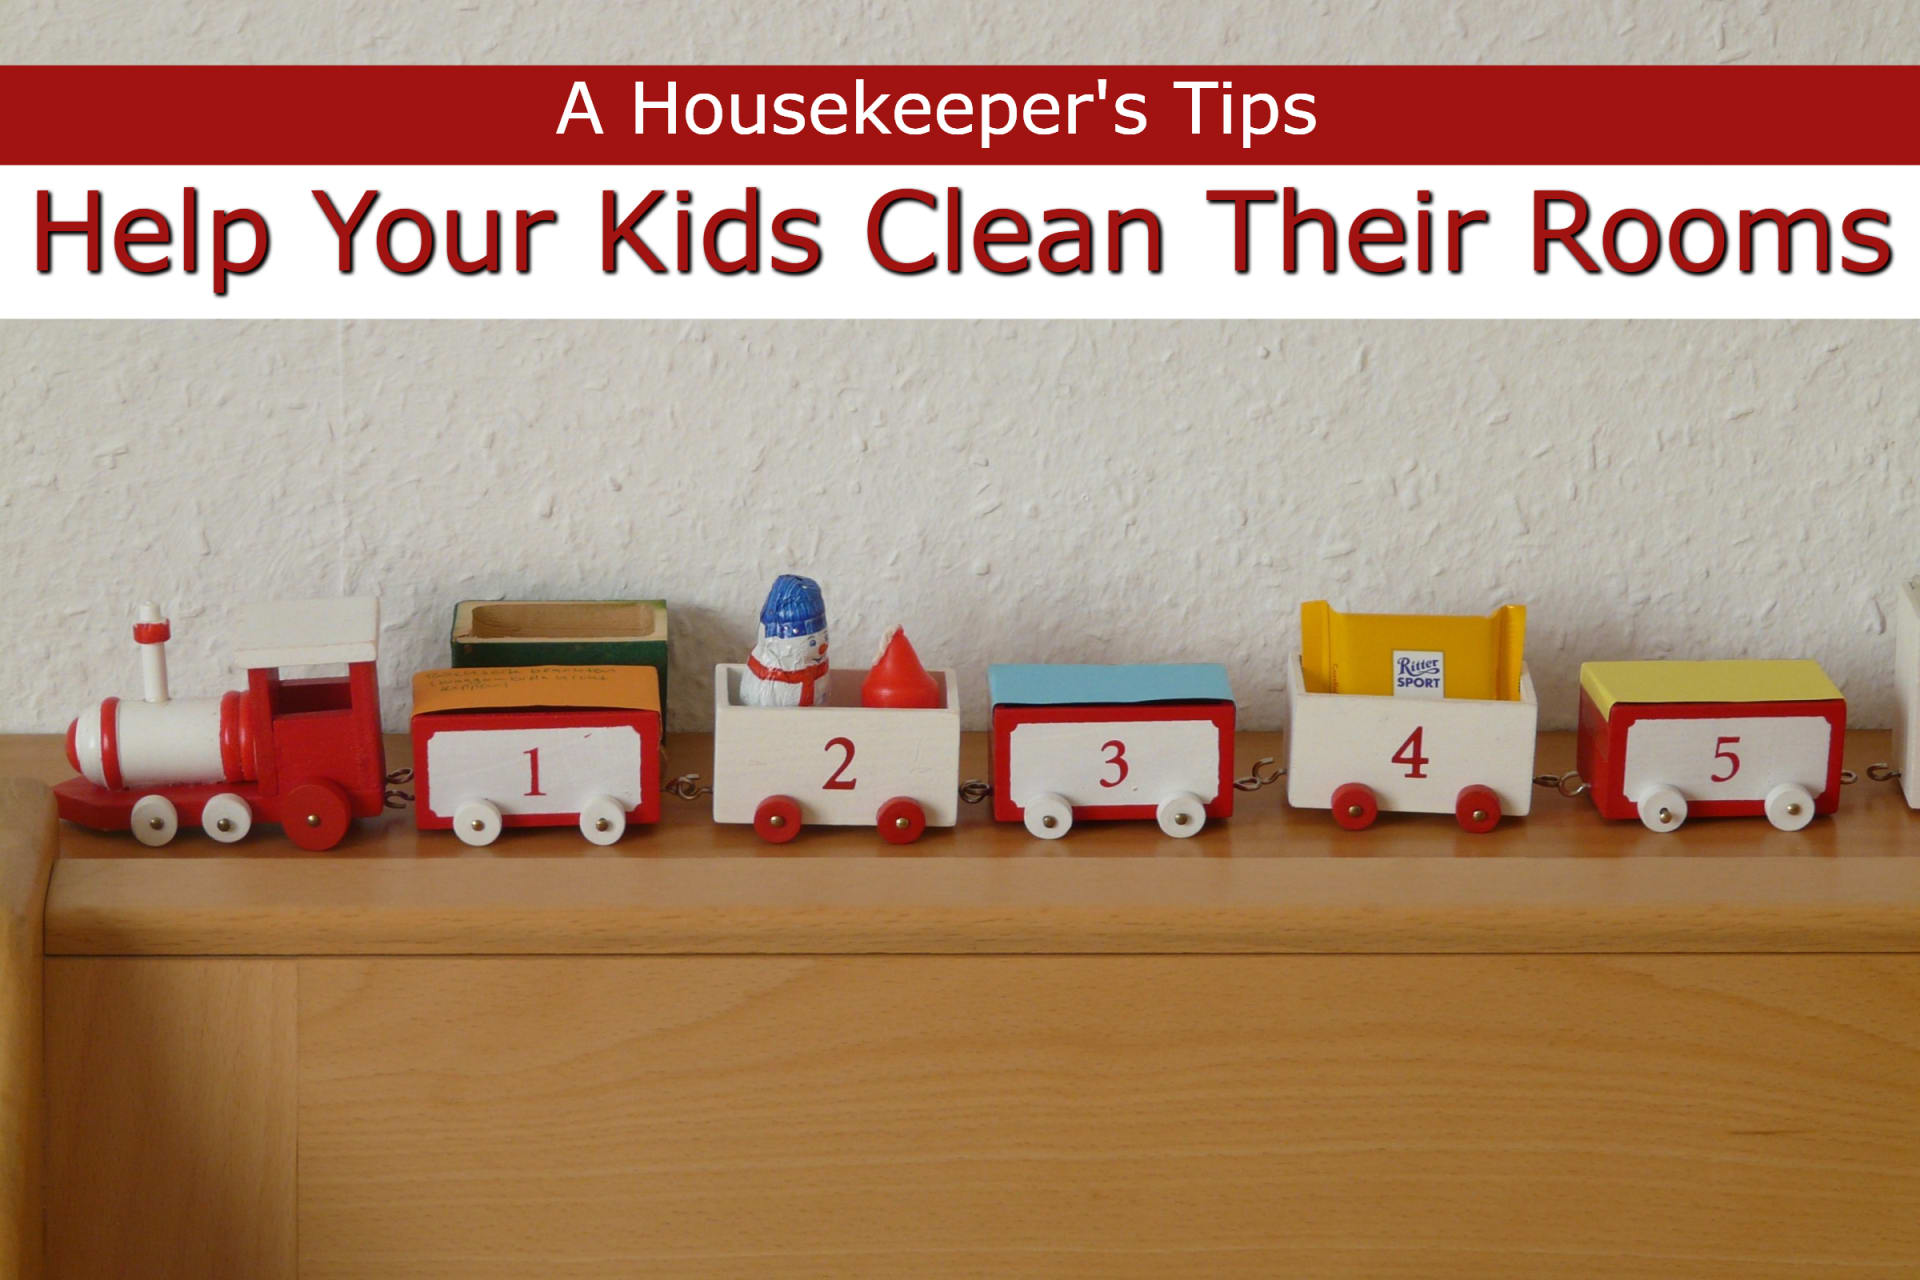 A Housekeeper’s Tips to Help Your Kids Clean Their Rooms